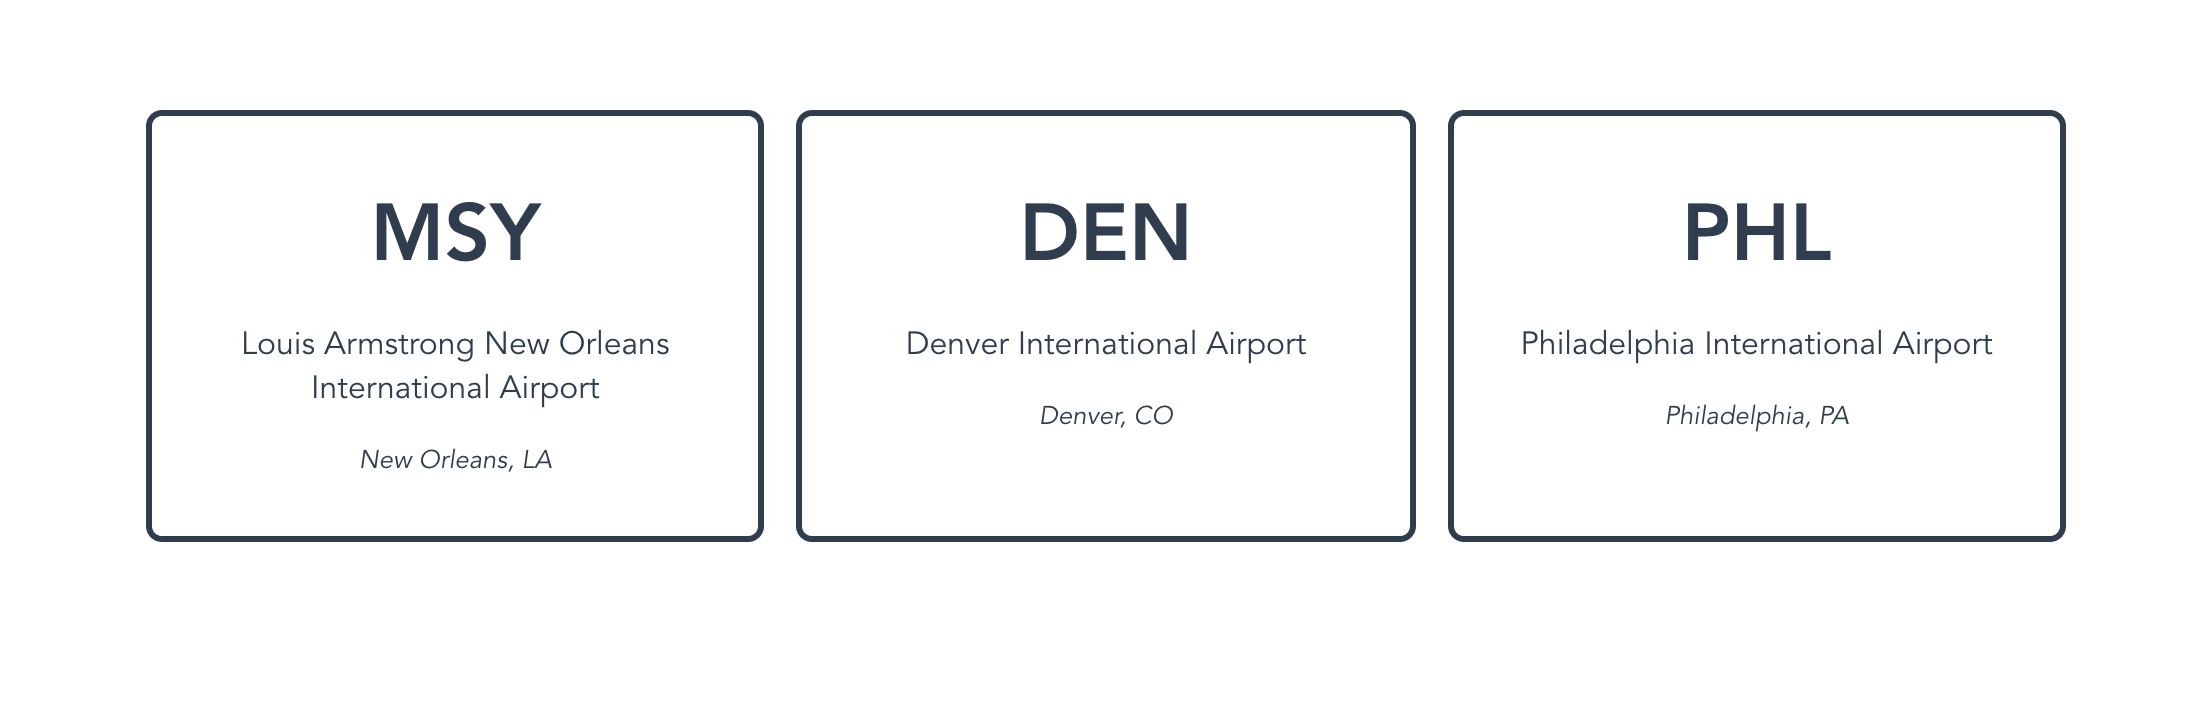 Styled cards containing airport data from the development dataset.